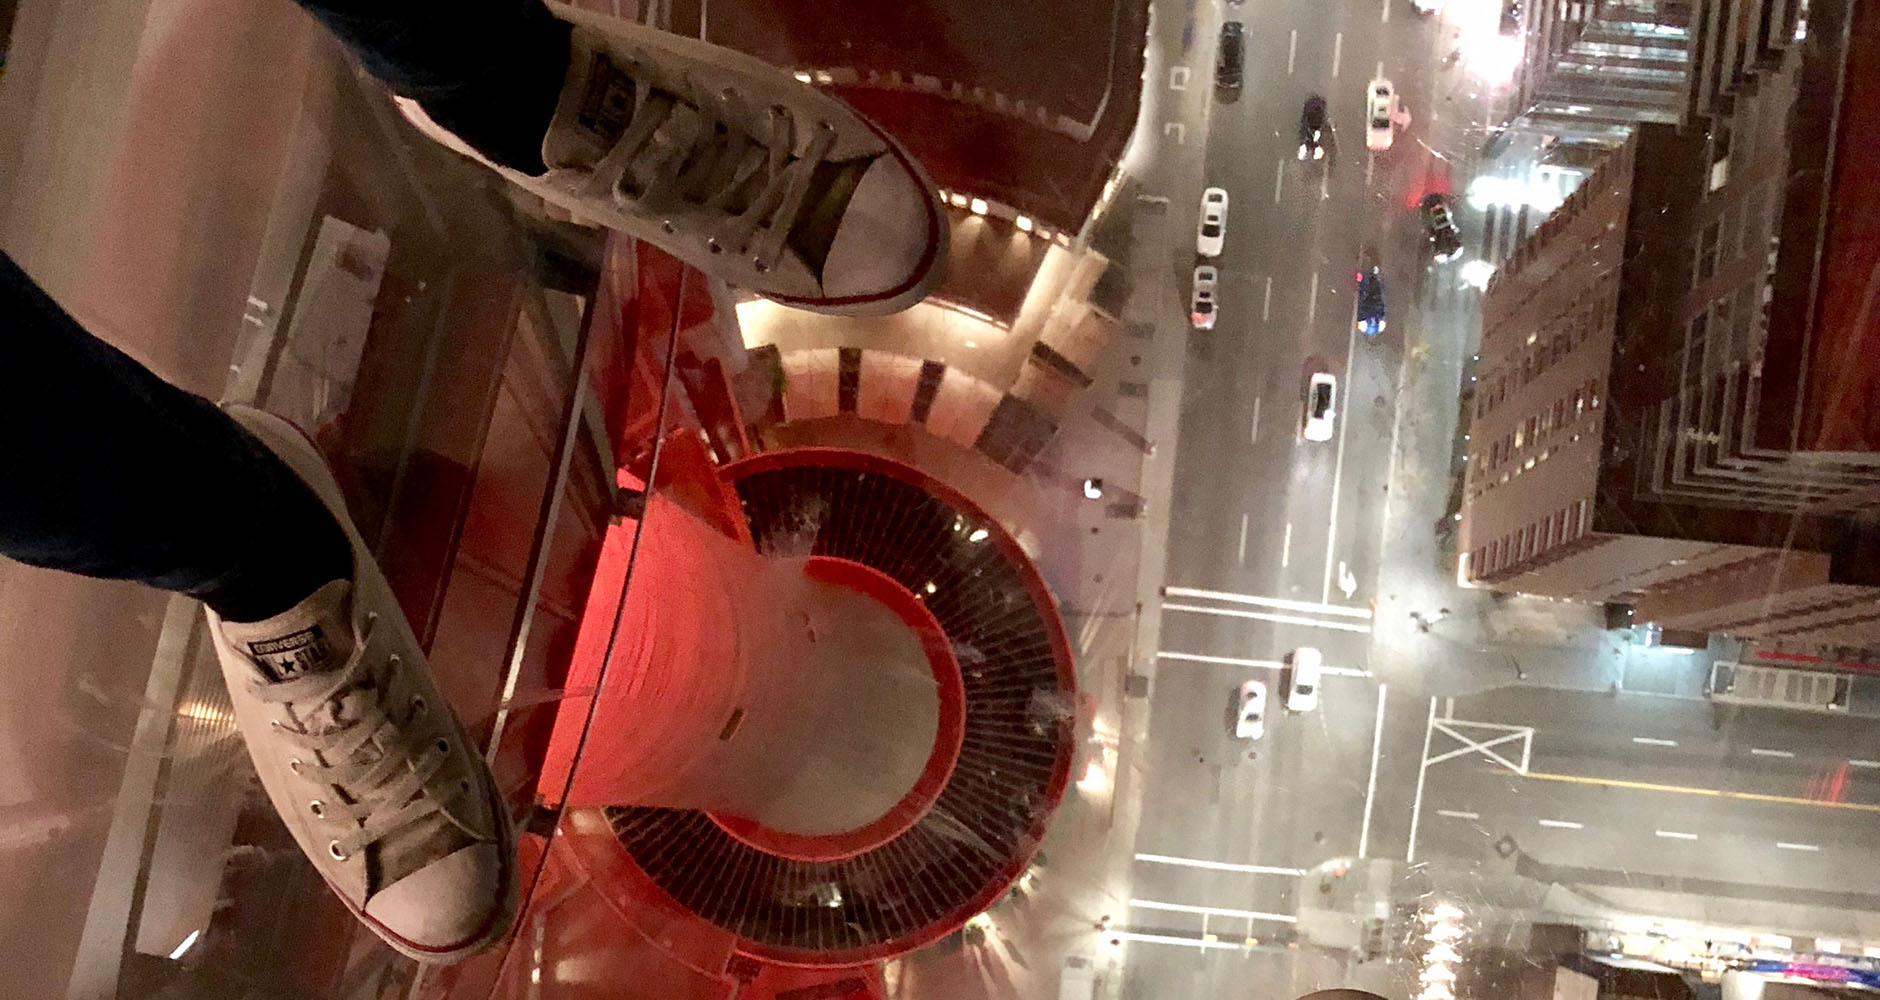 The observation deck in Calgary Tower